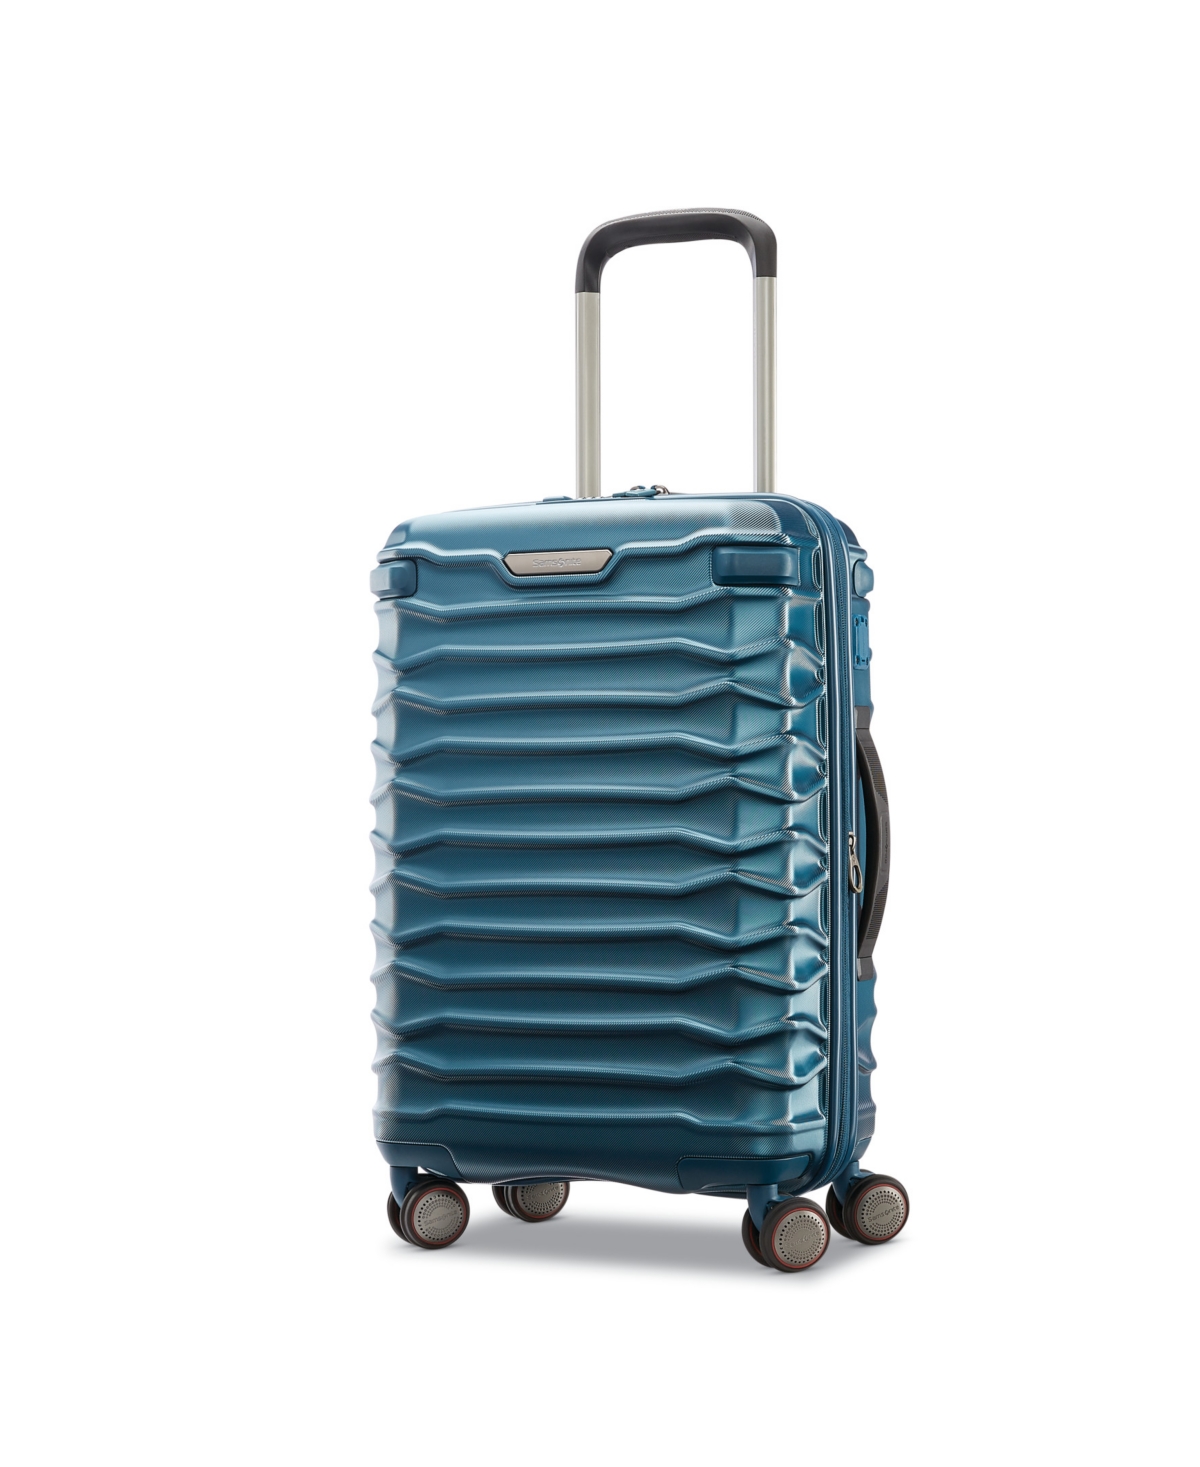 Stryde 2 22" x 14" x 9" Carry-On - Deep Teal